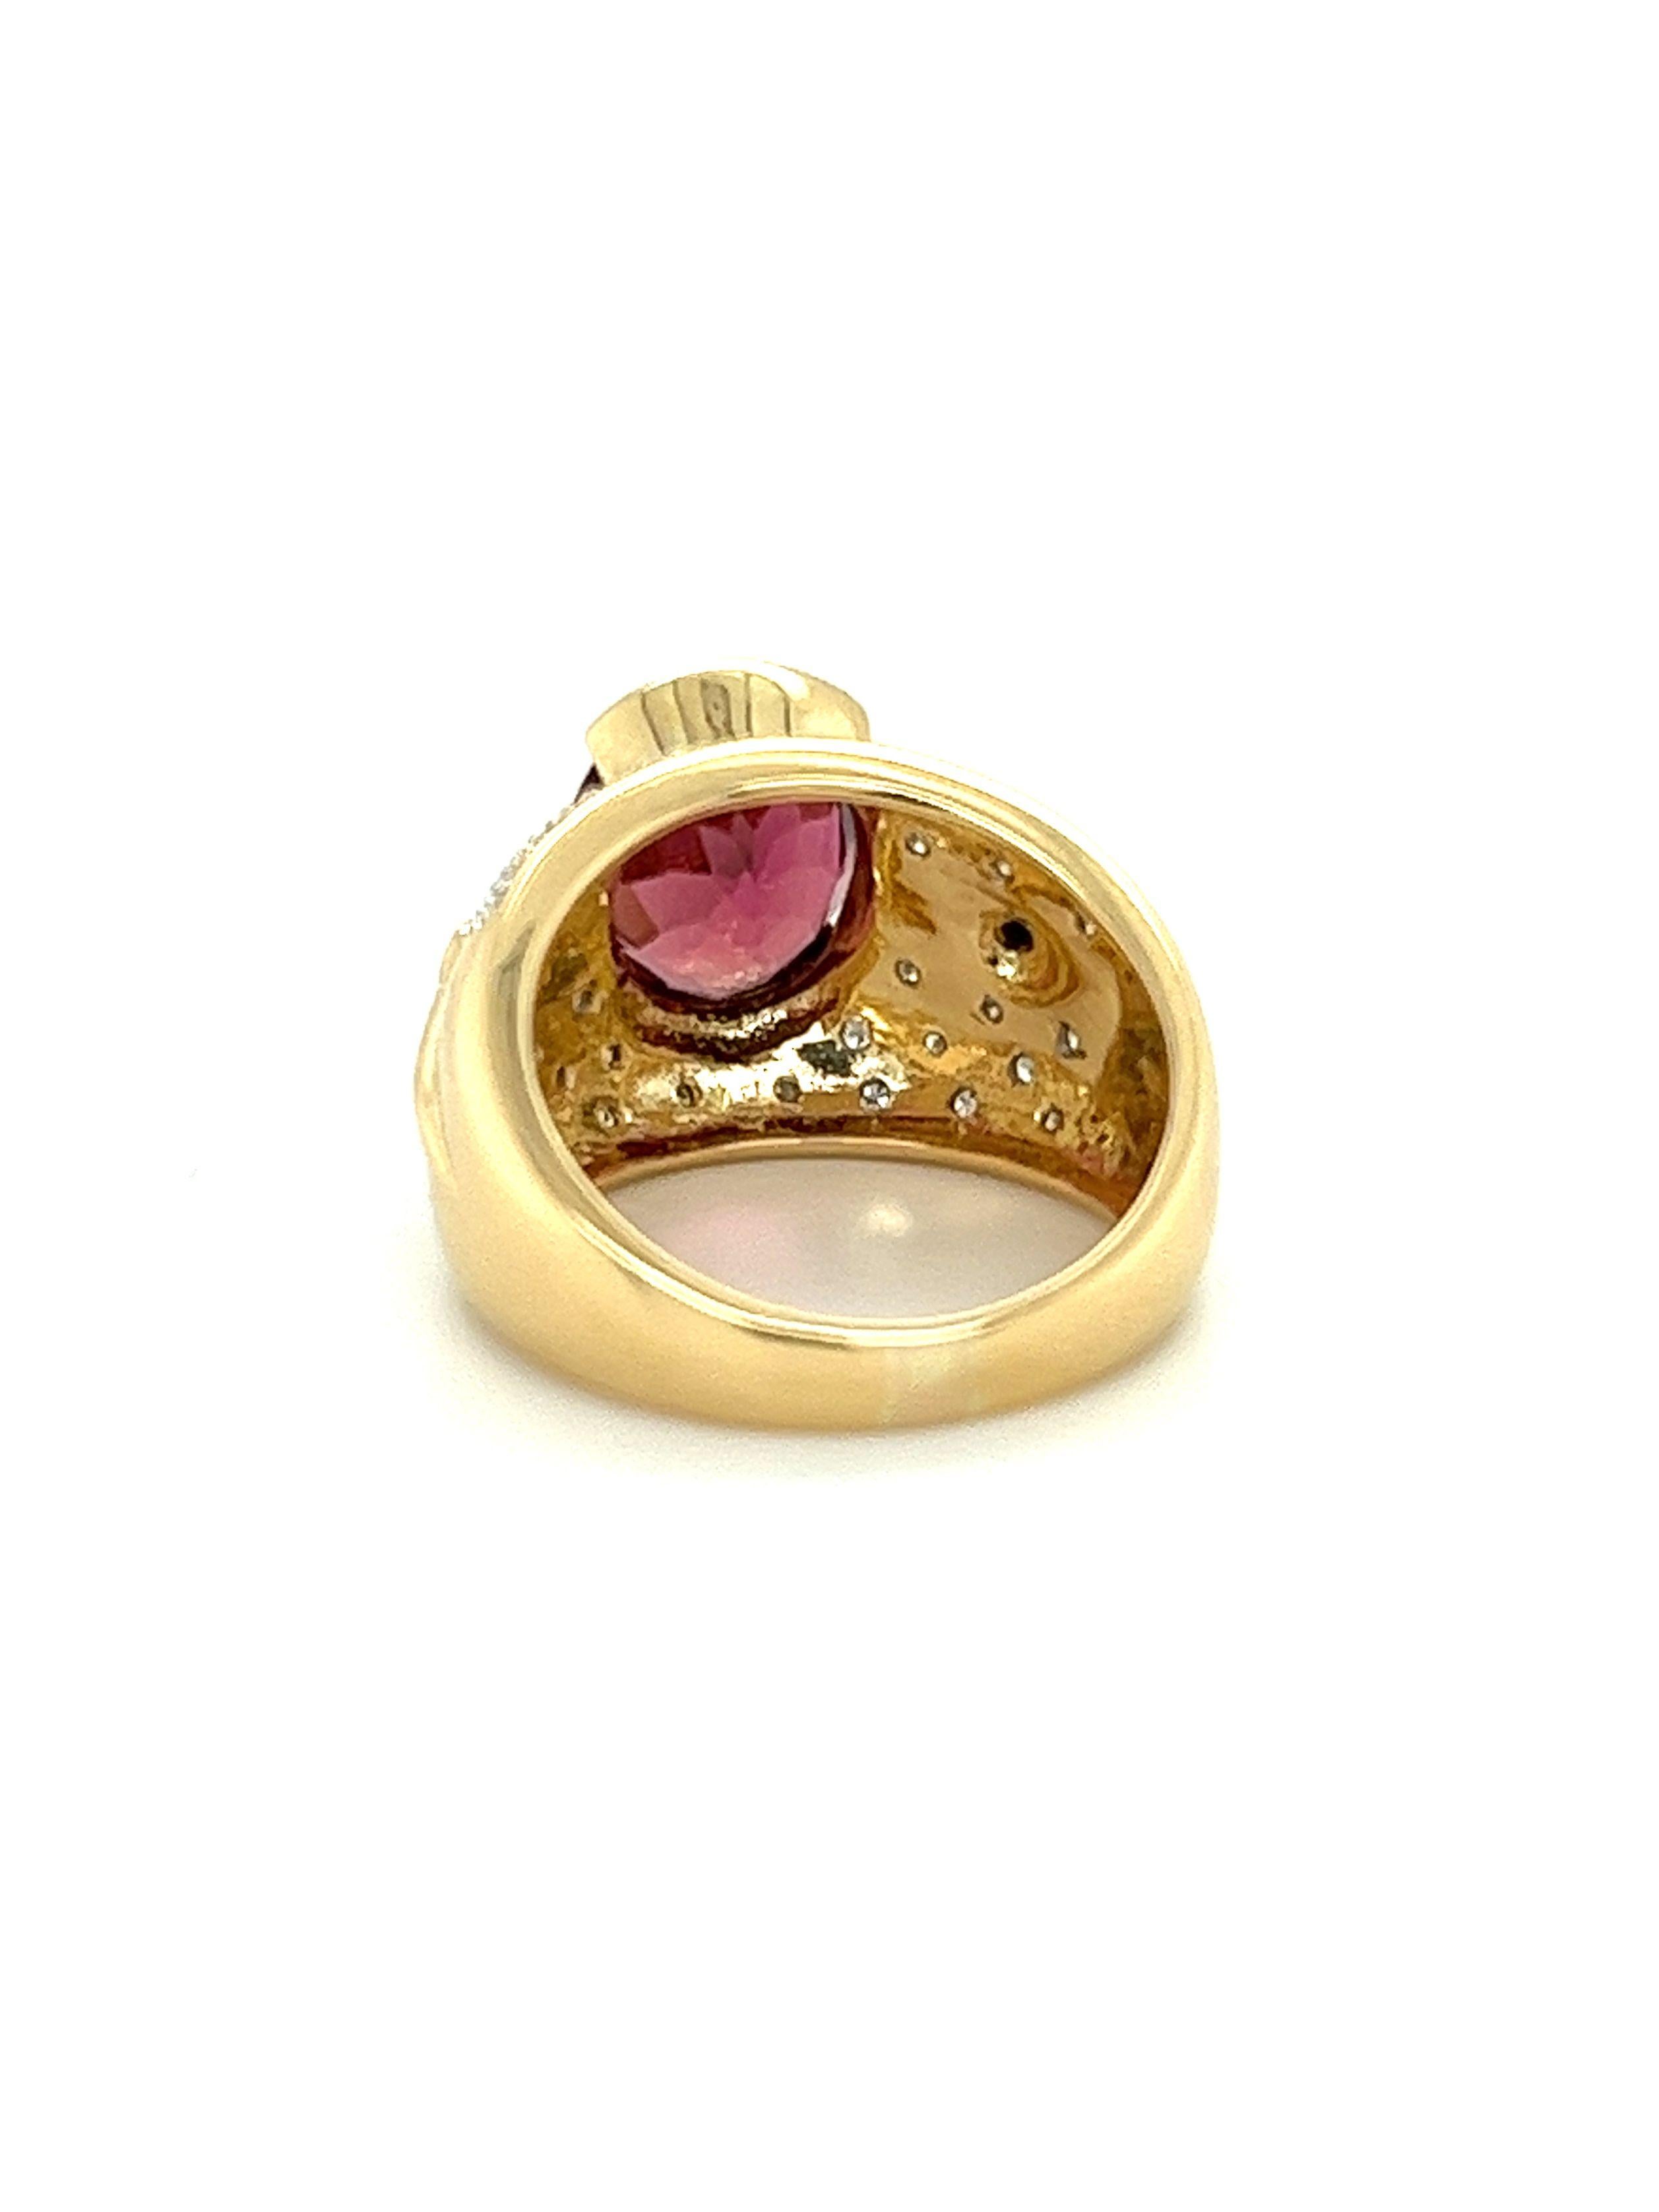 6 Carat Pinkish Red Oval Tourmaline with Black & White Diamond in 18K Gold In New Condition For Sale In Miami, FL